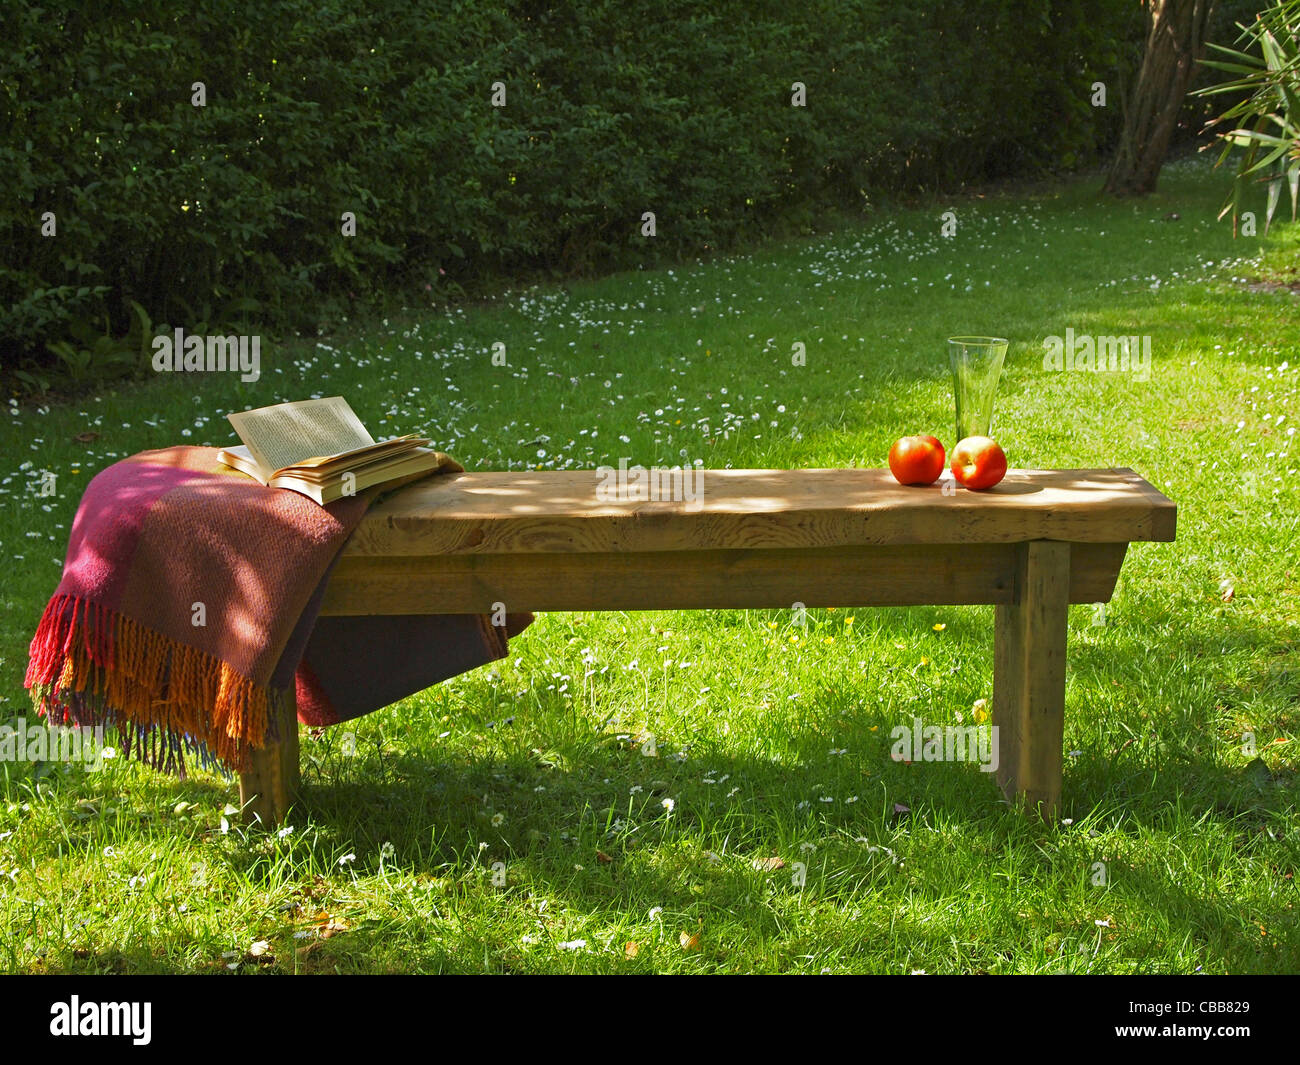 A relaxed atmosphere in a sunny English country garden - the wooden bench has a book, blanket and refreshments on it Stock Photo